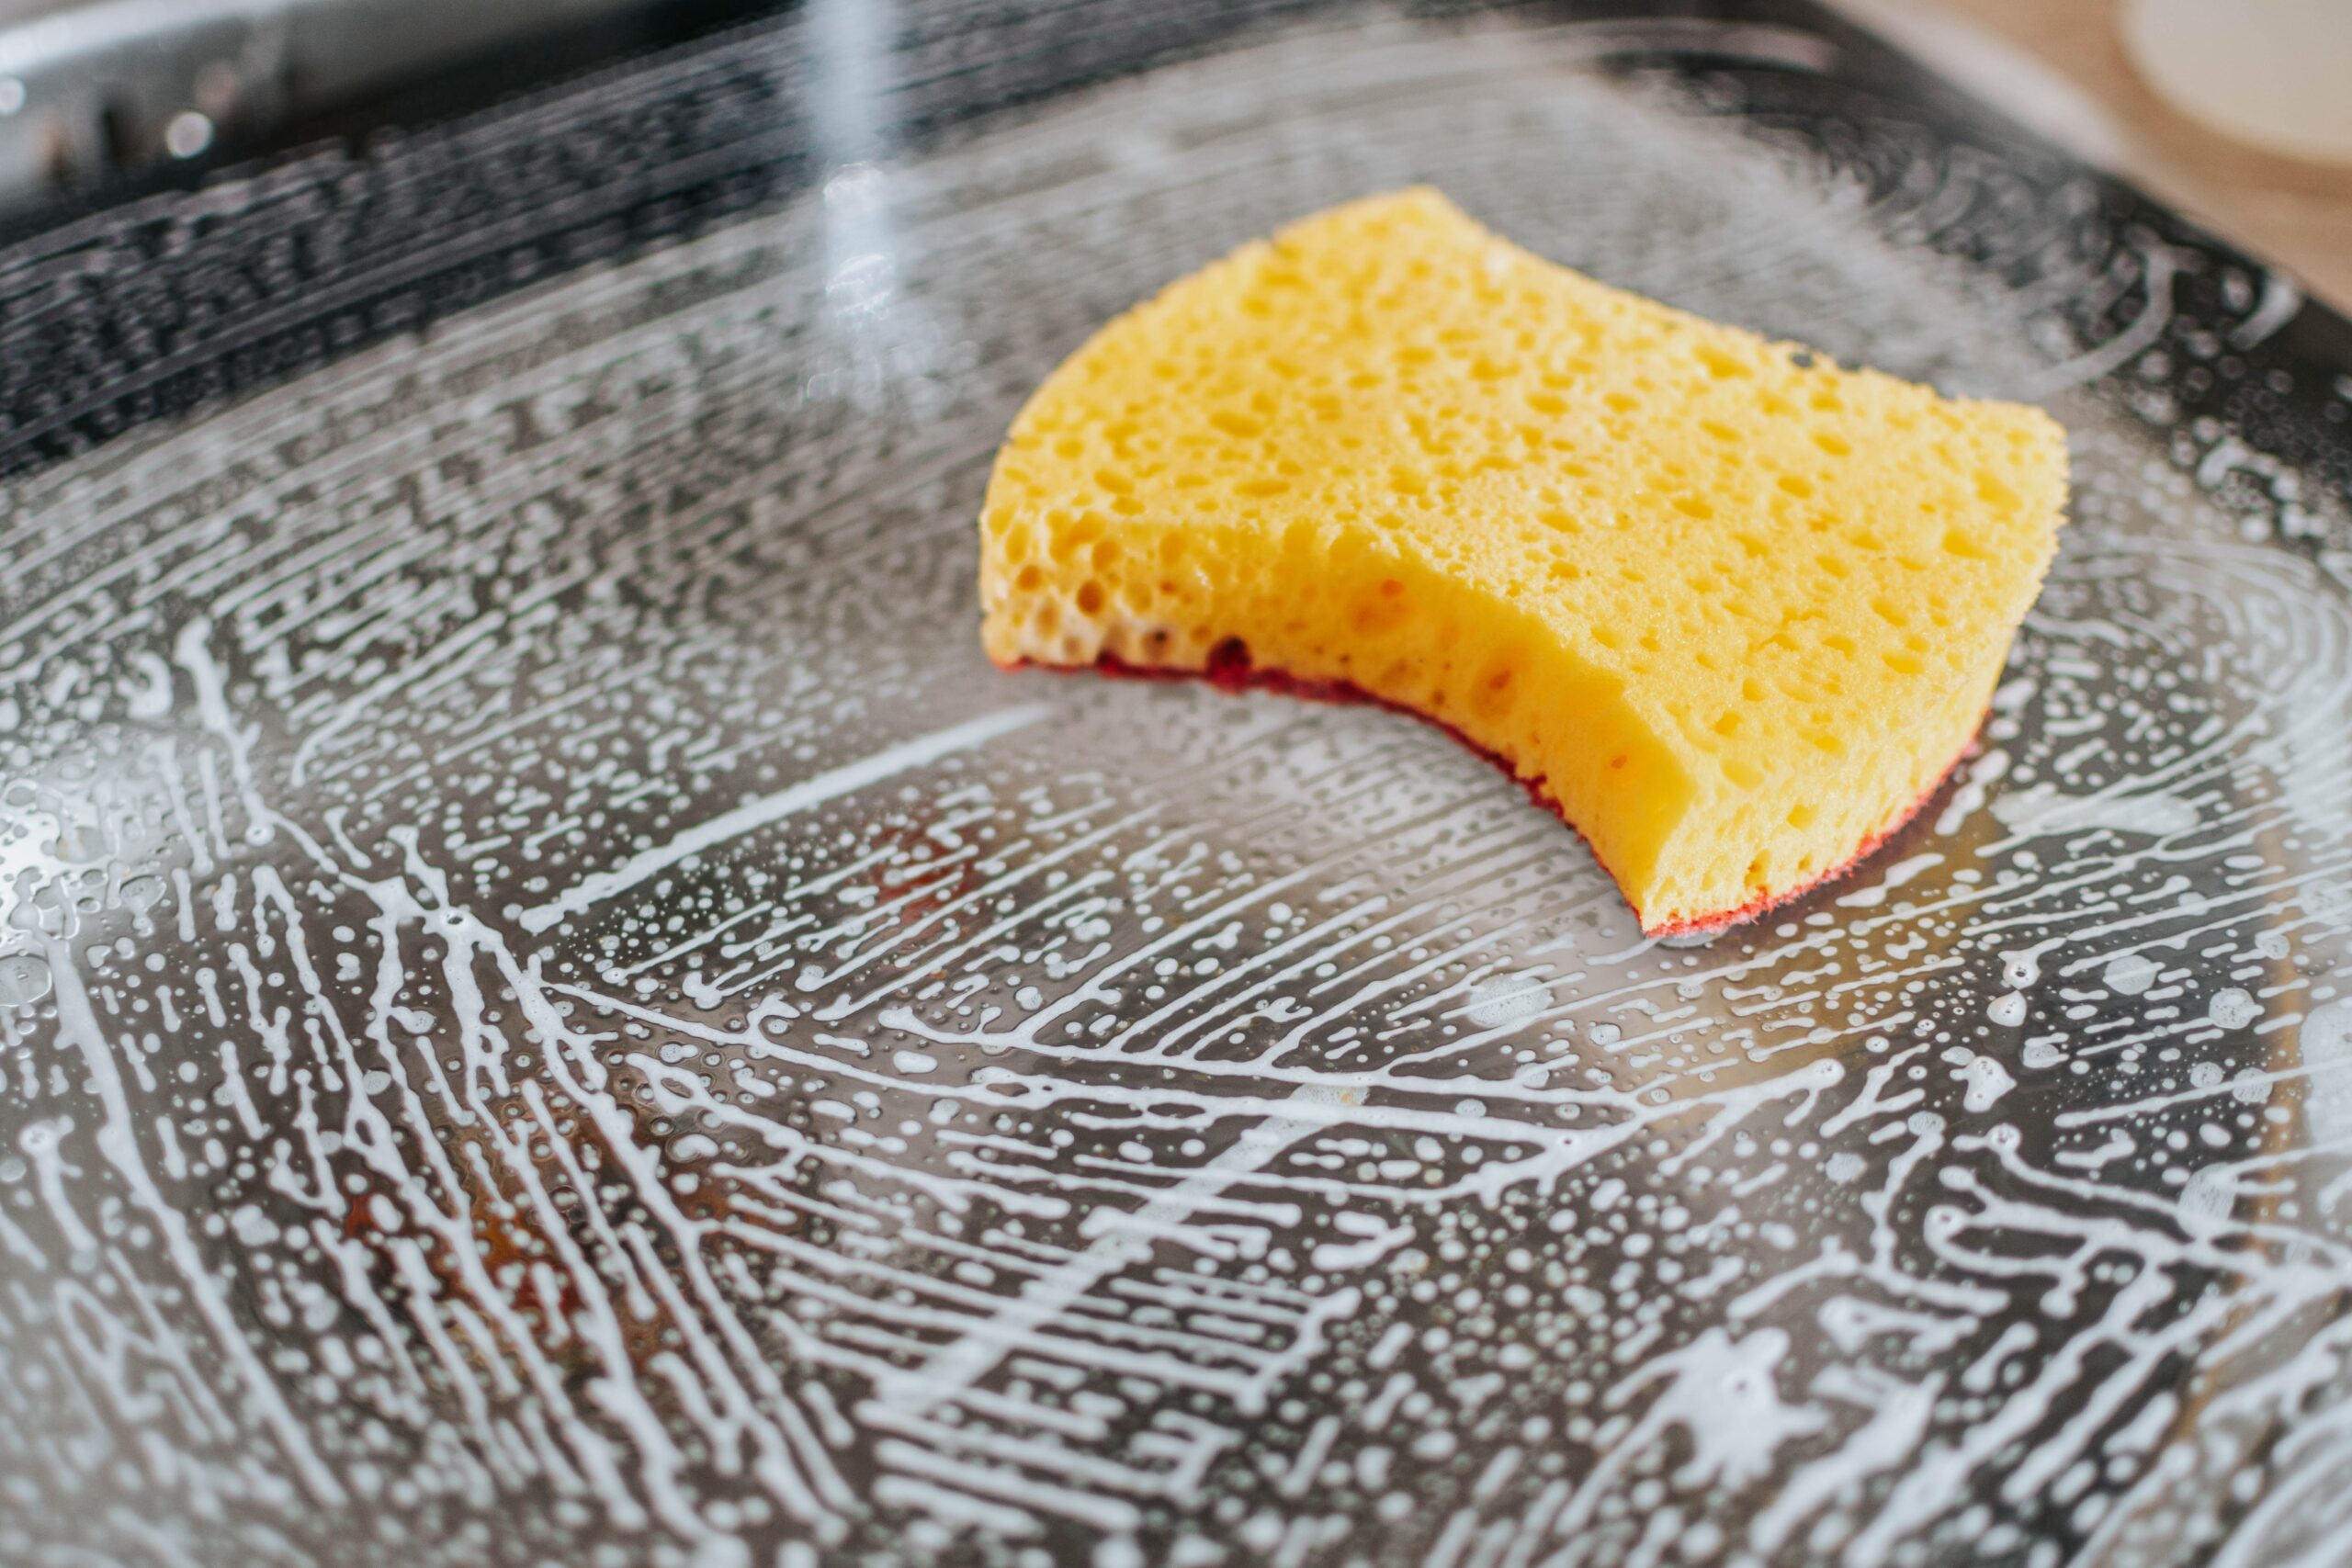 How to Clean a Sponge Don't Throw it Away